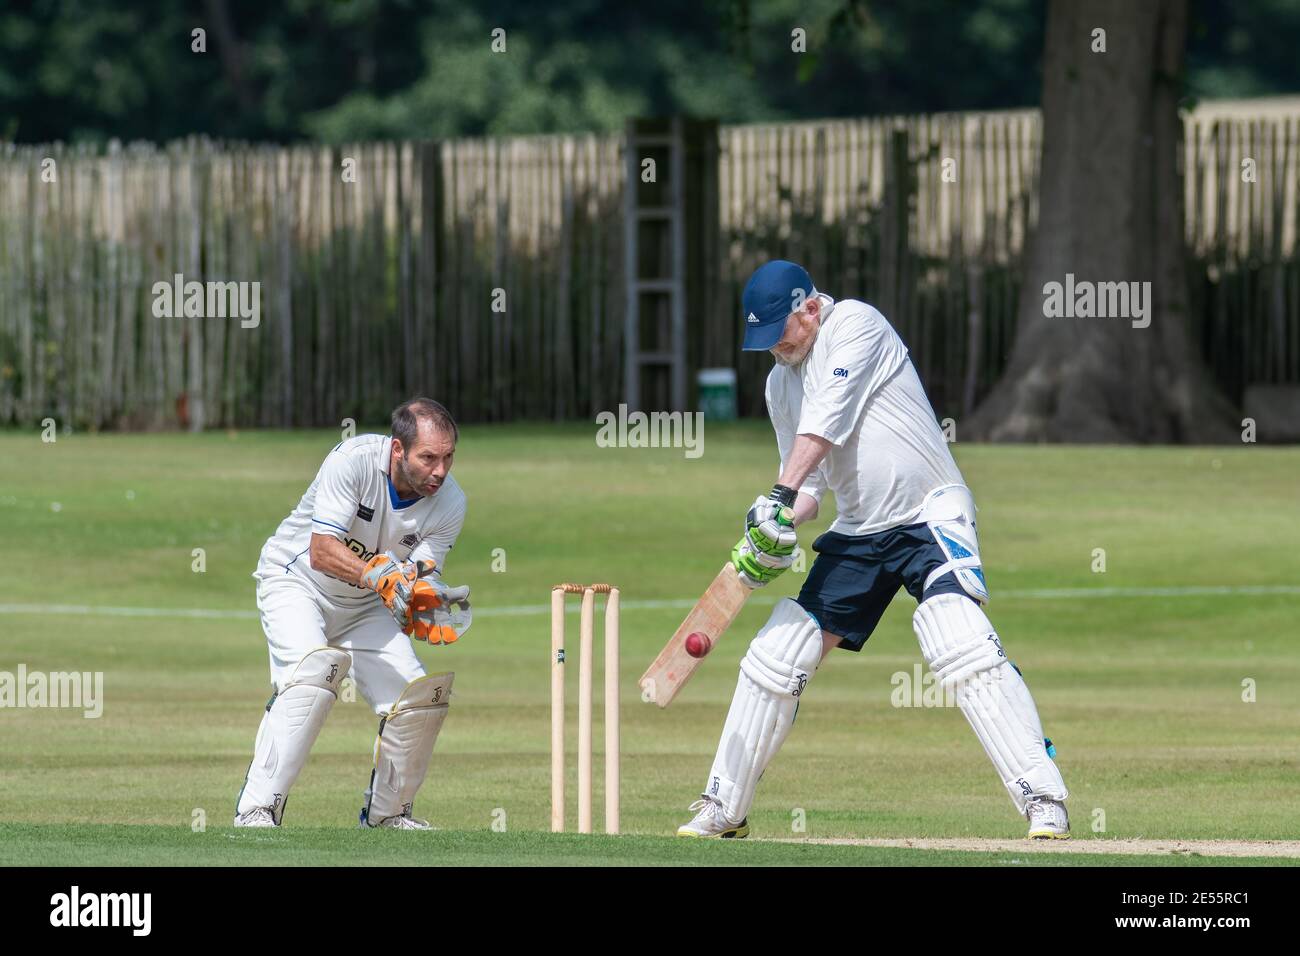 Batter swings at cricket ball as wicket keeper reaches out for the catch at amateur cricket in Perth, Scotland. cricket in Perth, Scotland Stock Photo